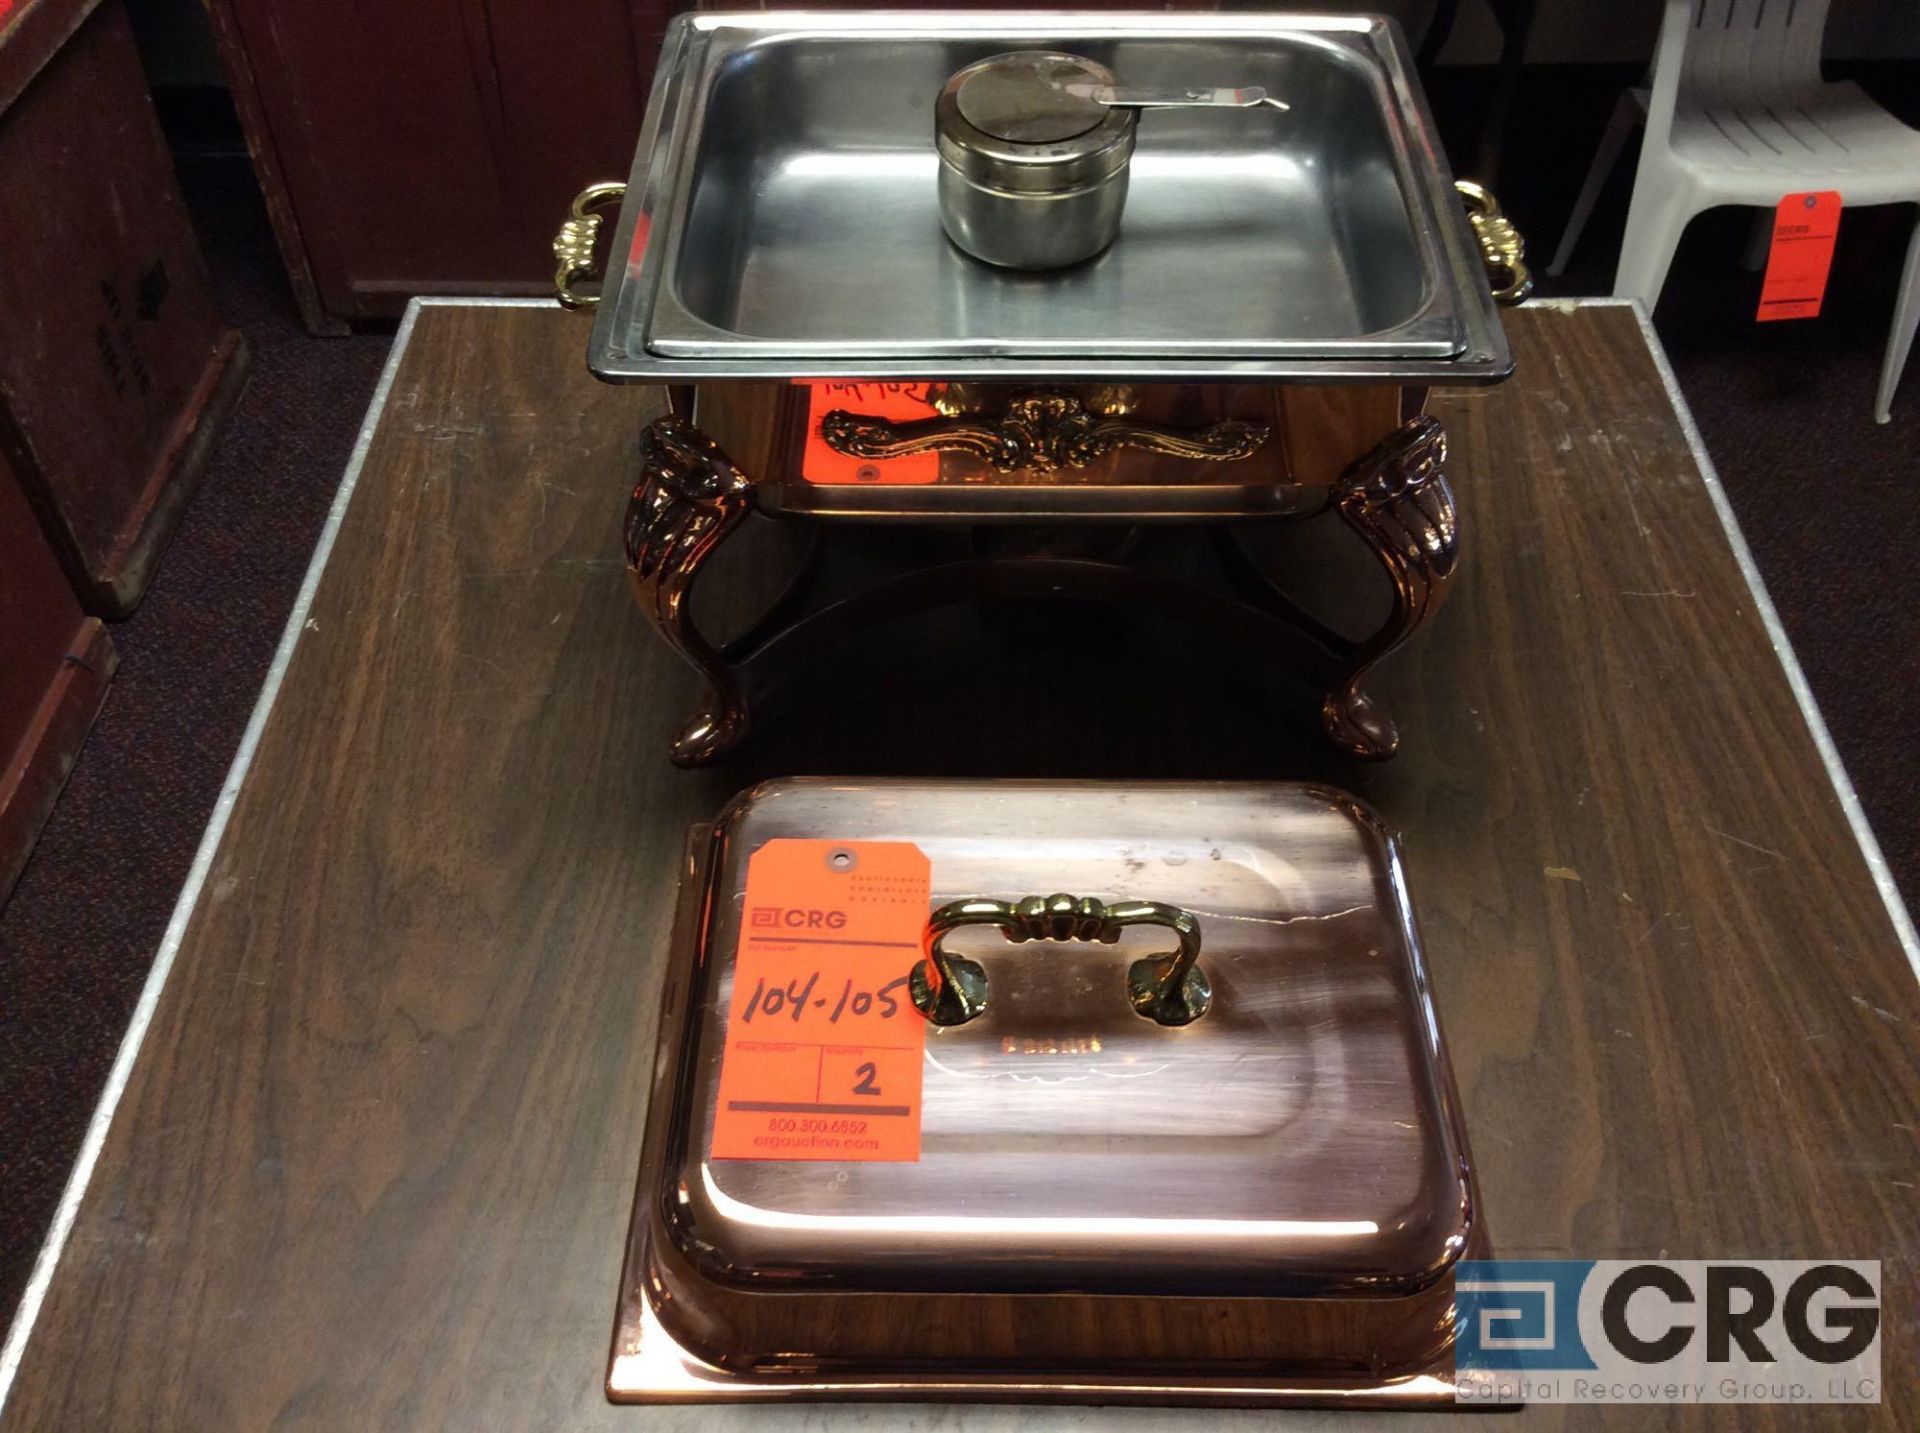 Lot of (2) 4 Qt copper plated chafing dishes, 10 x 12